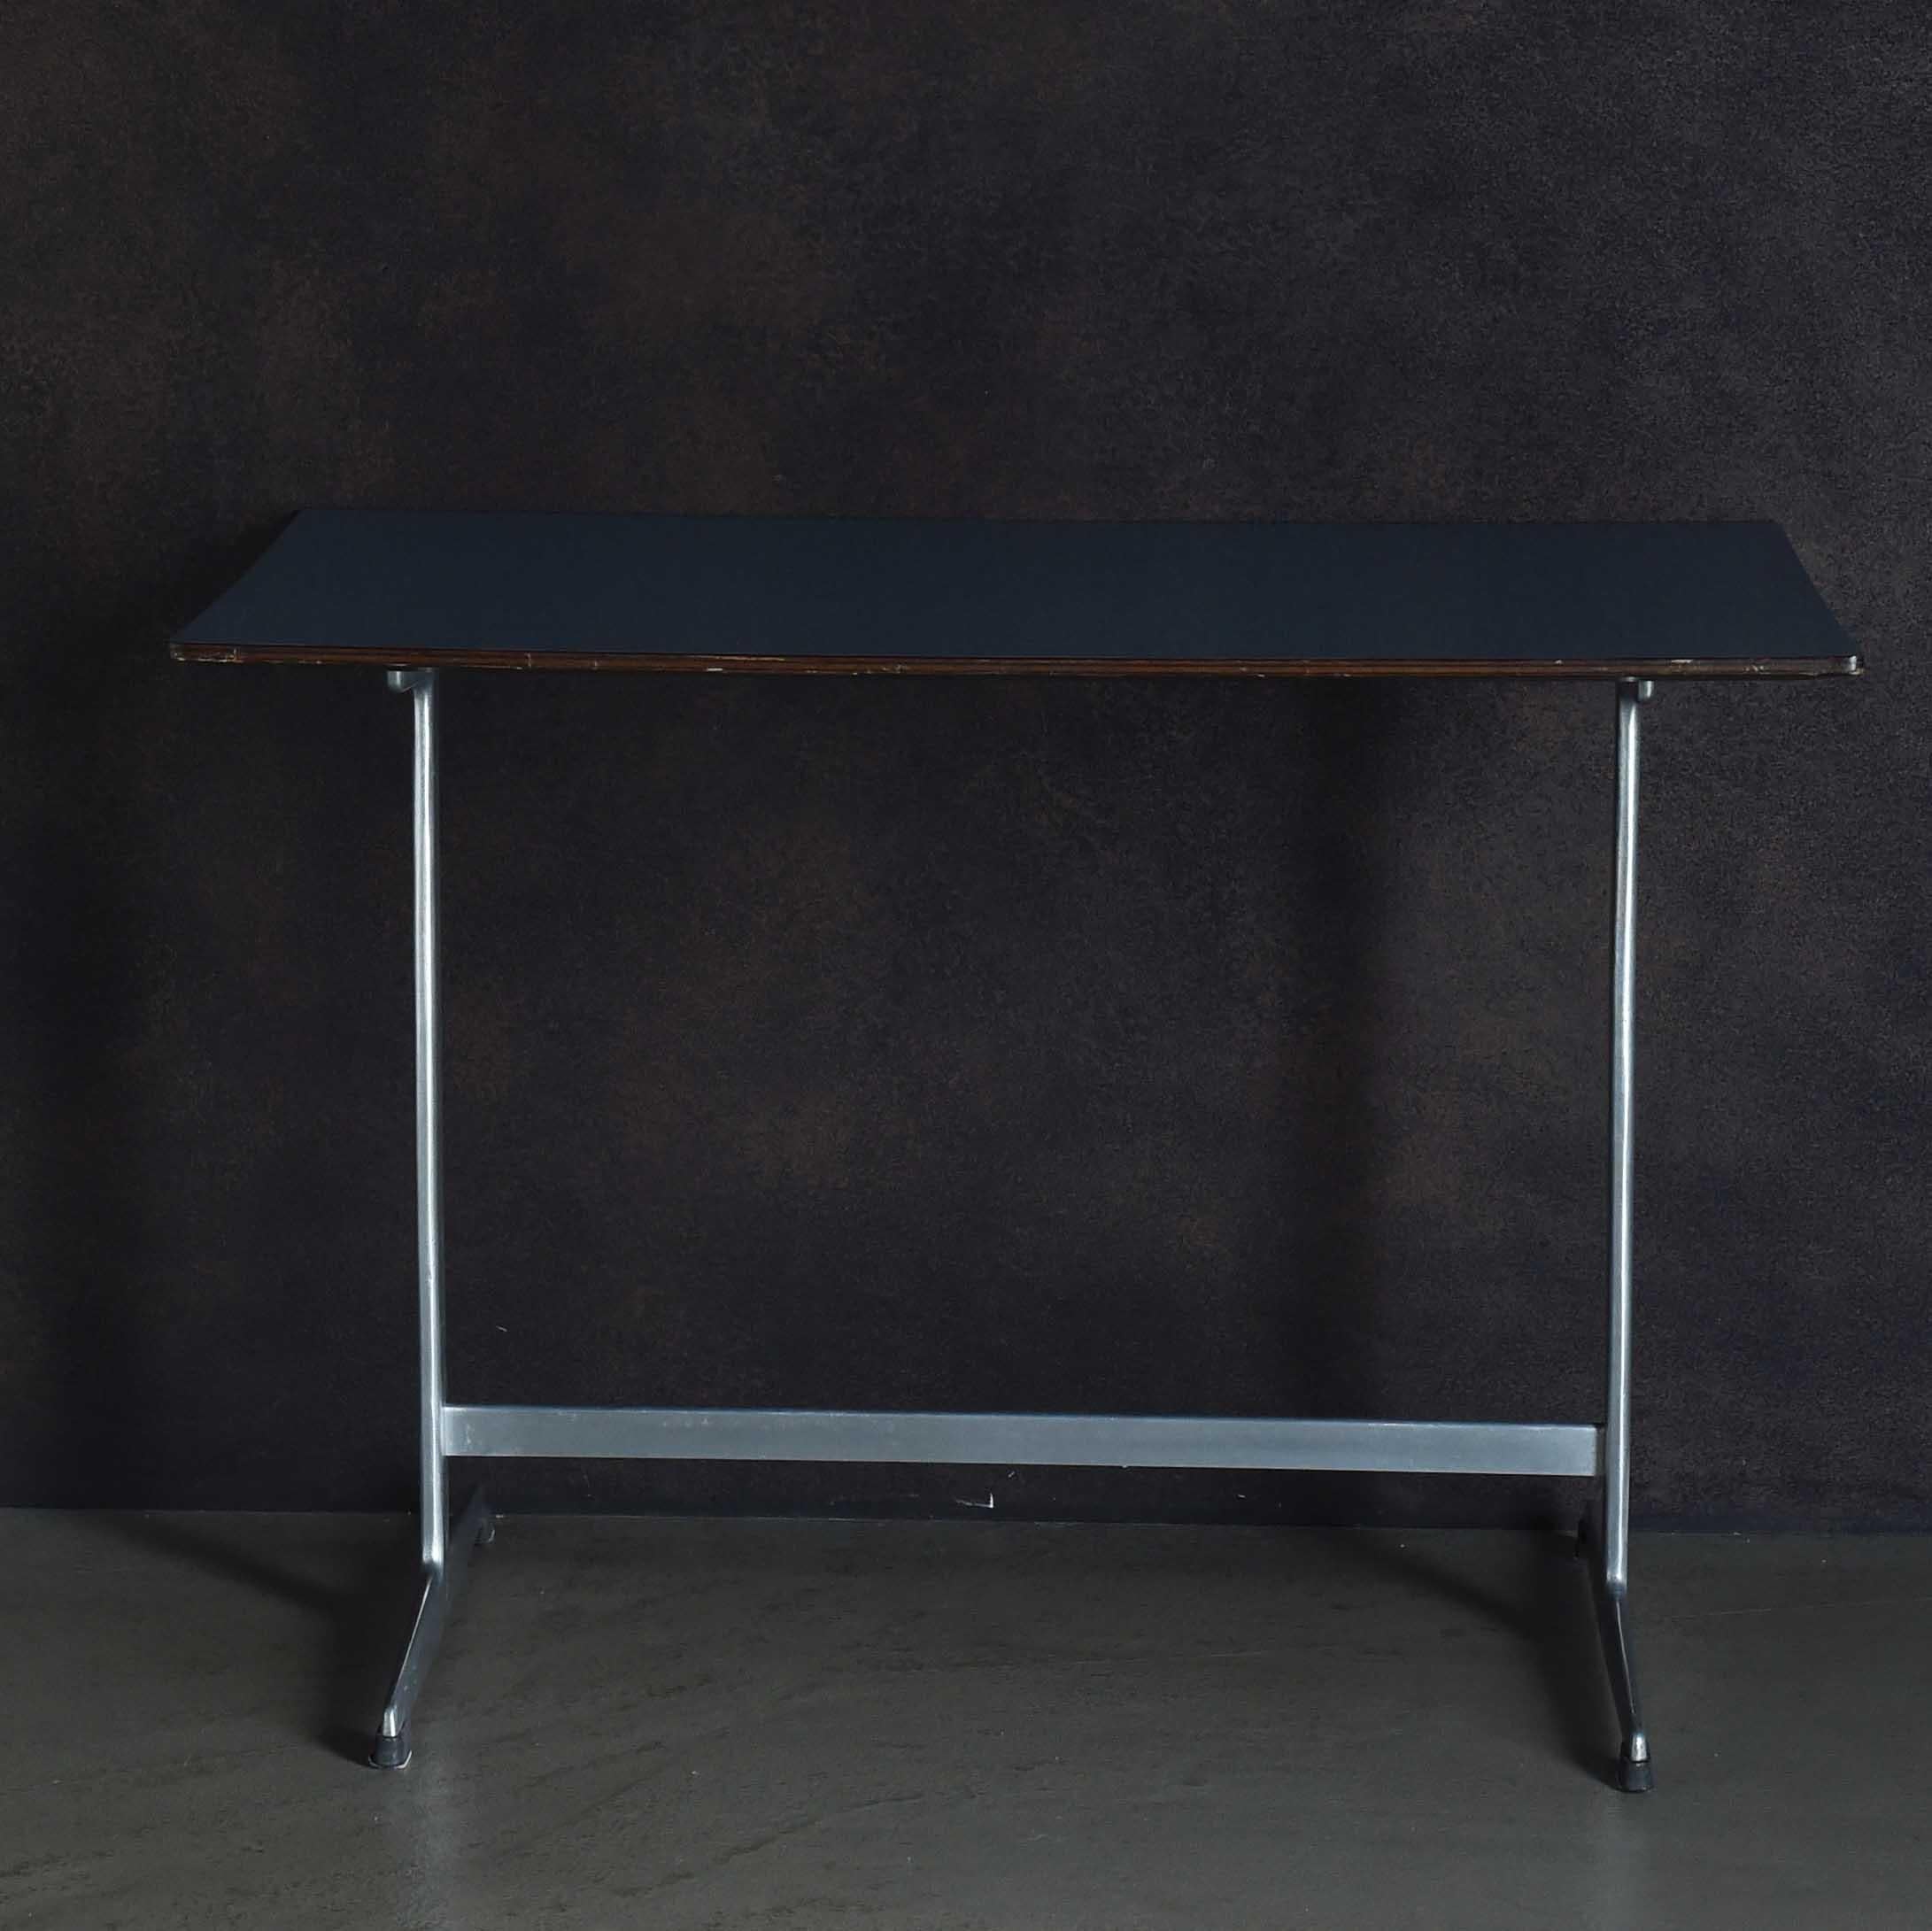 The Shaker Board (table) has a sleek image, possibly due to its steel legs. This center table, with a rectangular top and a Shaker base, was designed by Arne Jacobsen in collaboration with Poul Henningsen and Bruno Mathsson as part of a series of